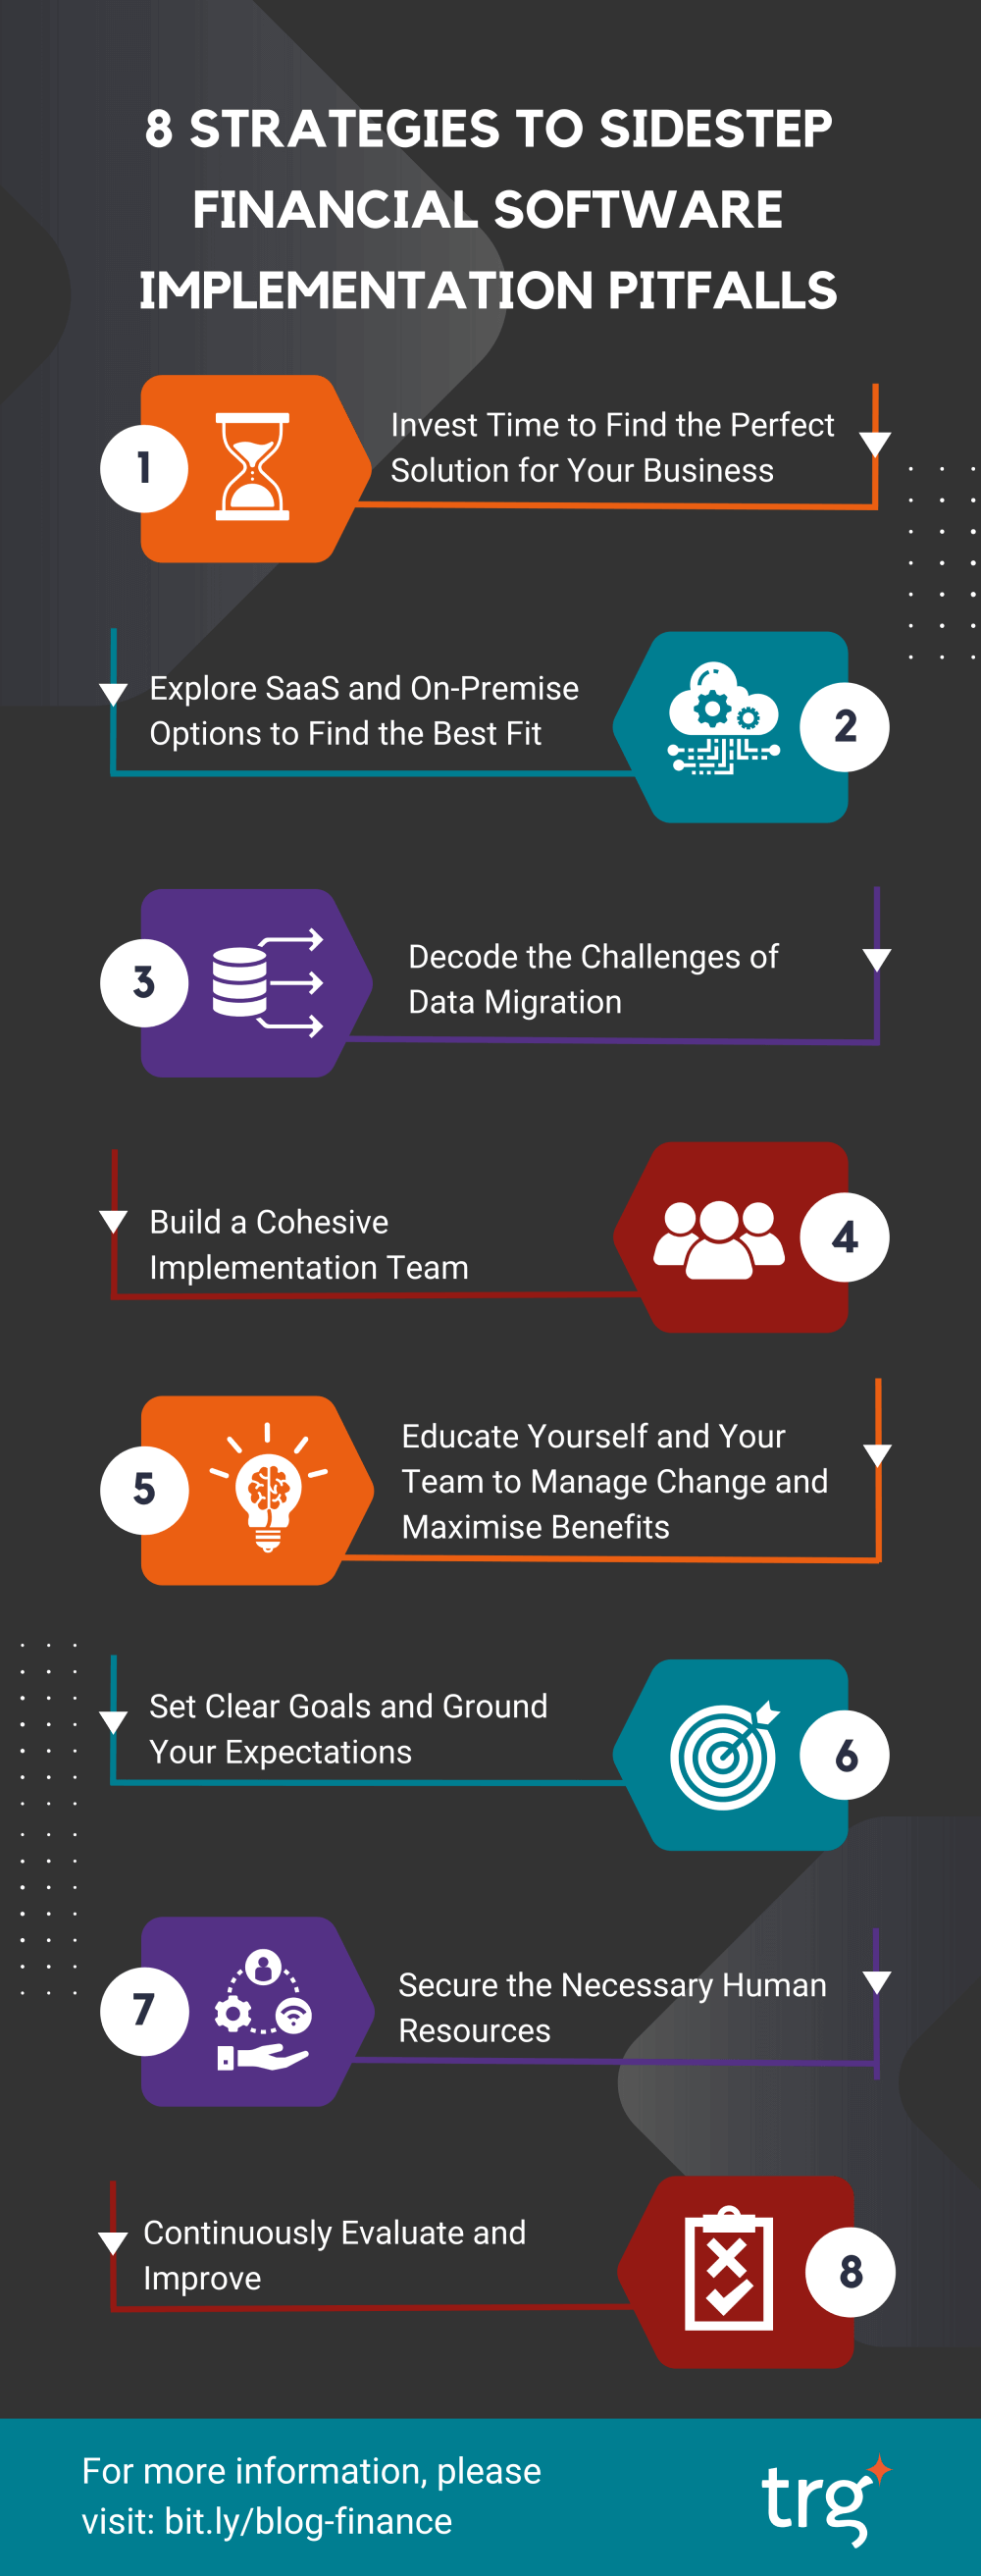 [Infographic] 8 strategies to sidestep financial software implementation pitfalls